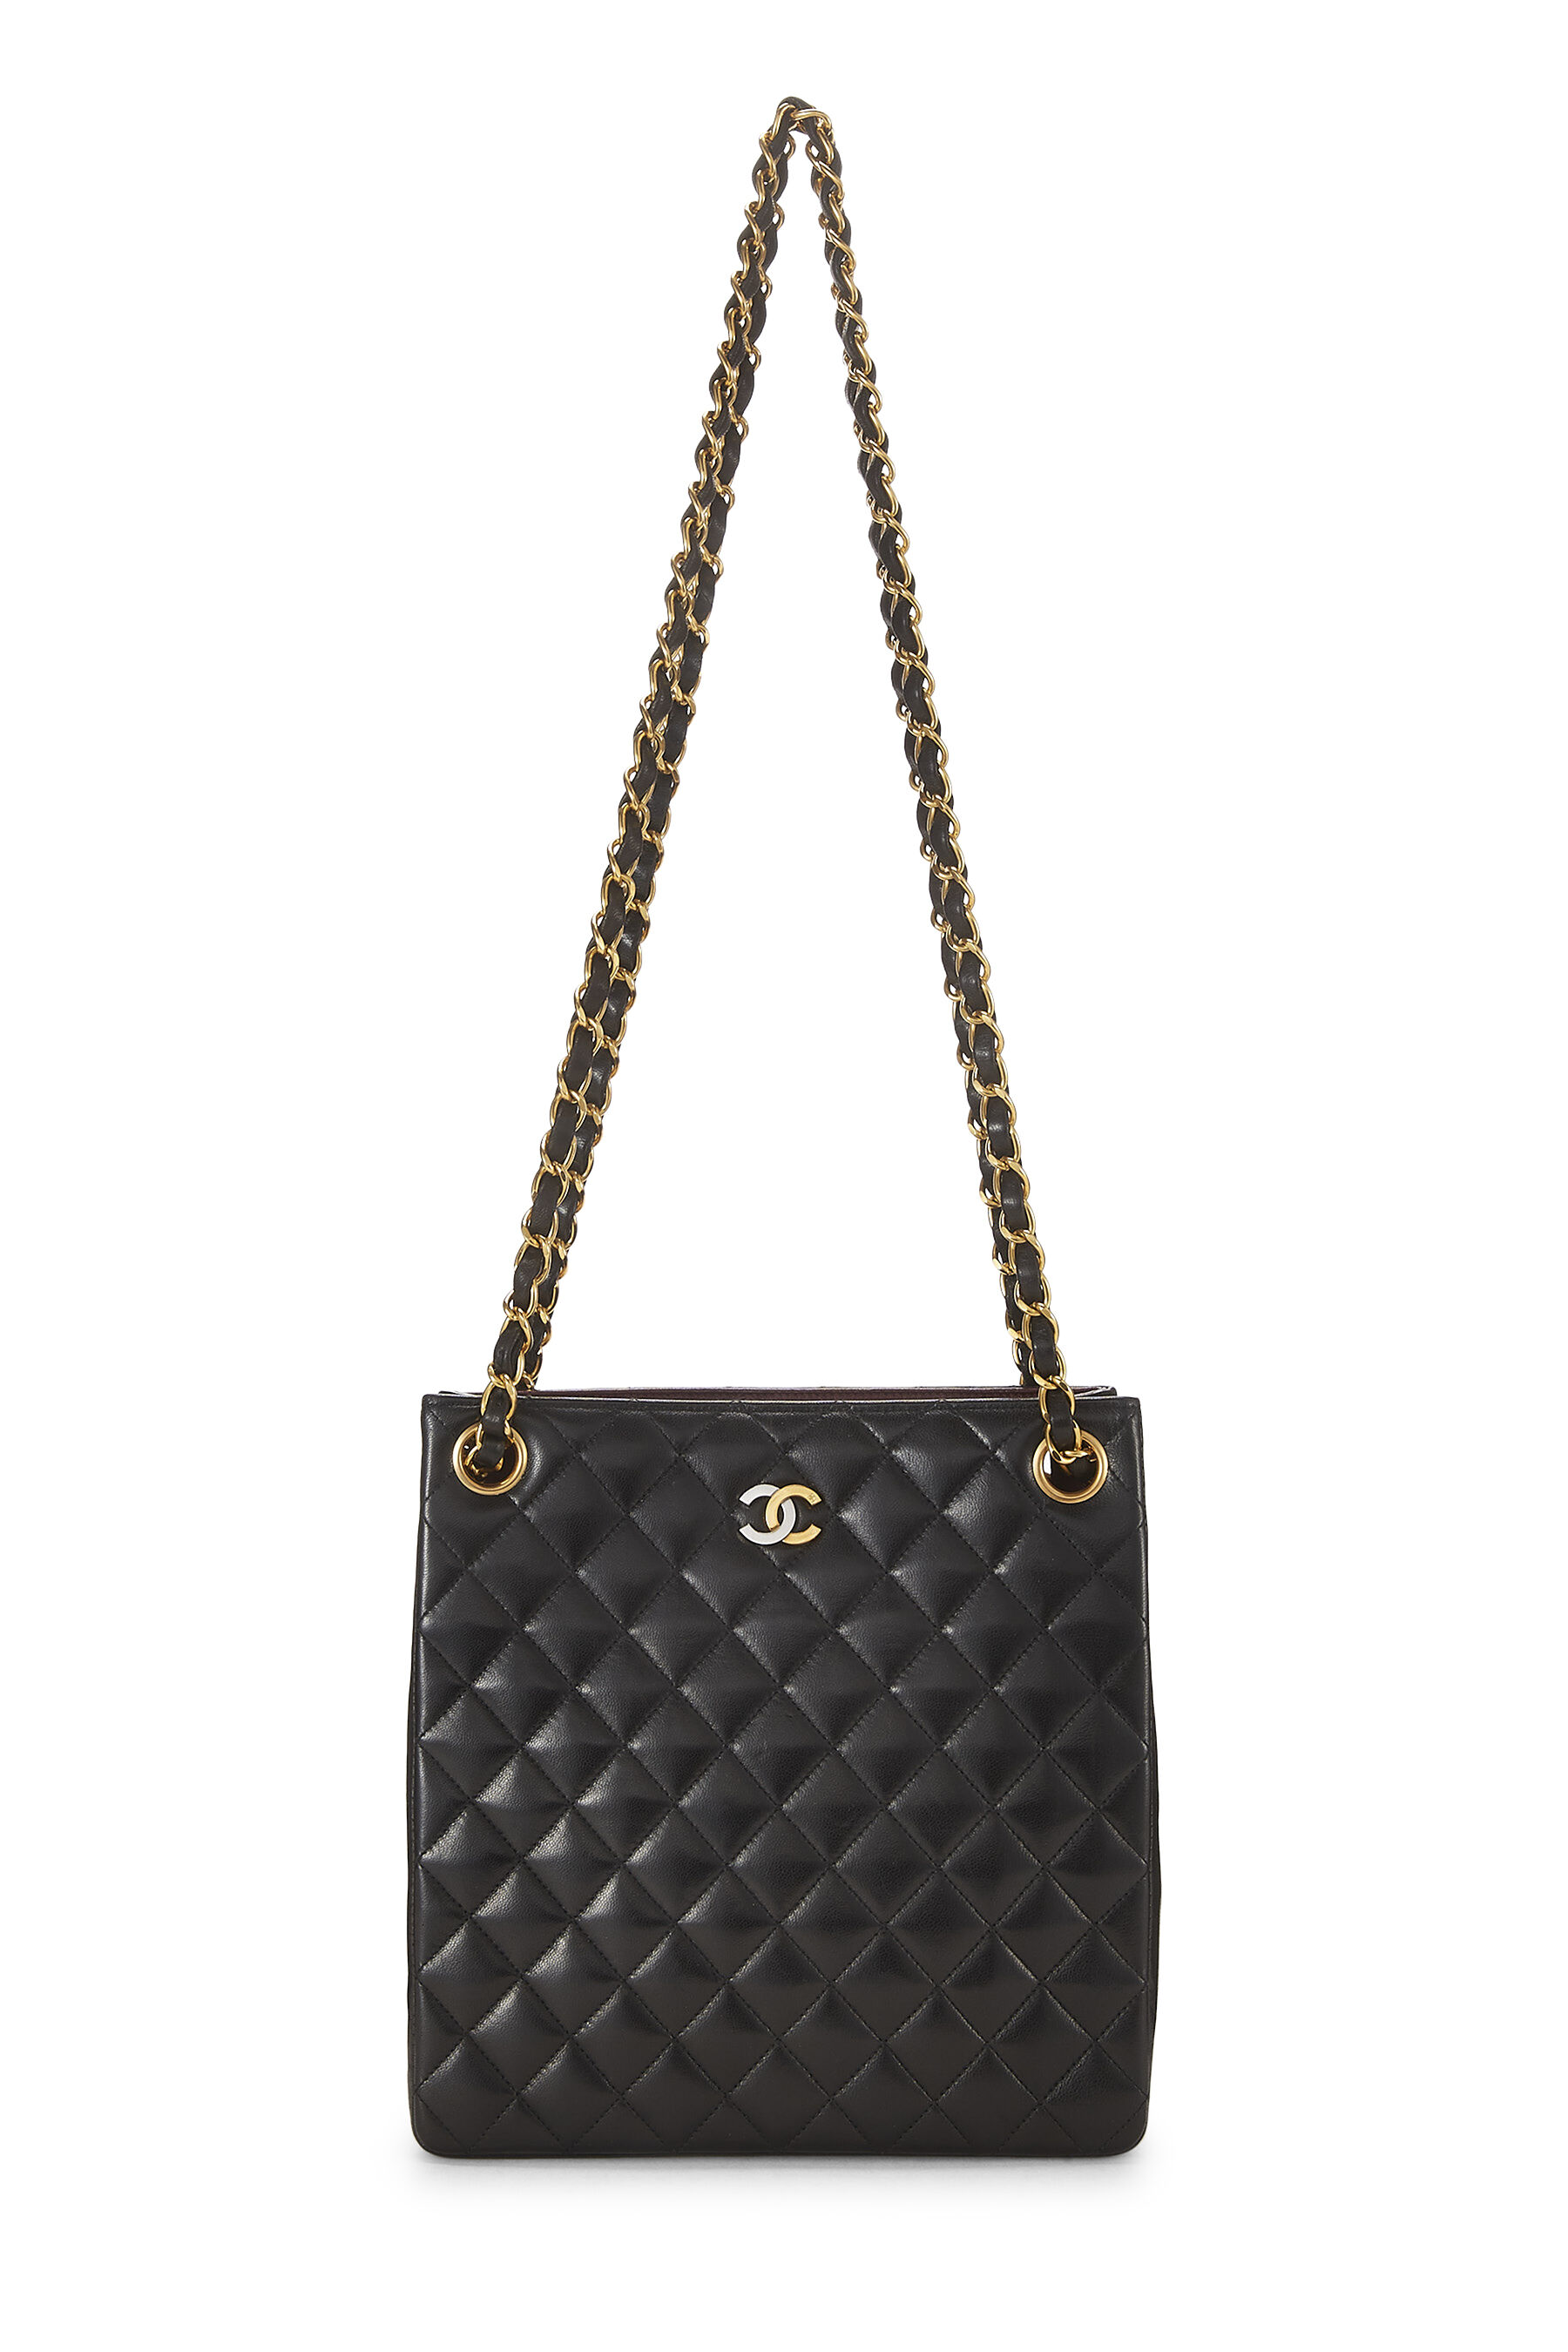 Chanel Black Quilted Lambskin Paris Limited Tote Small